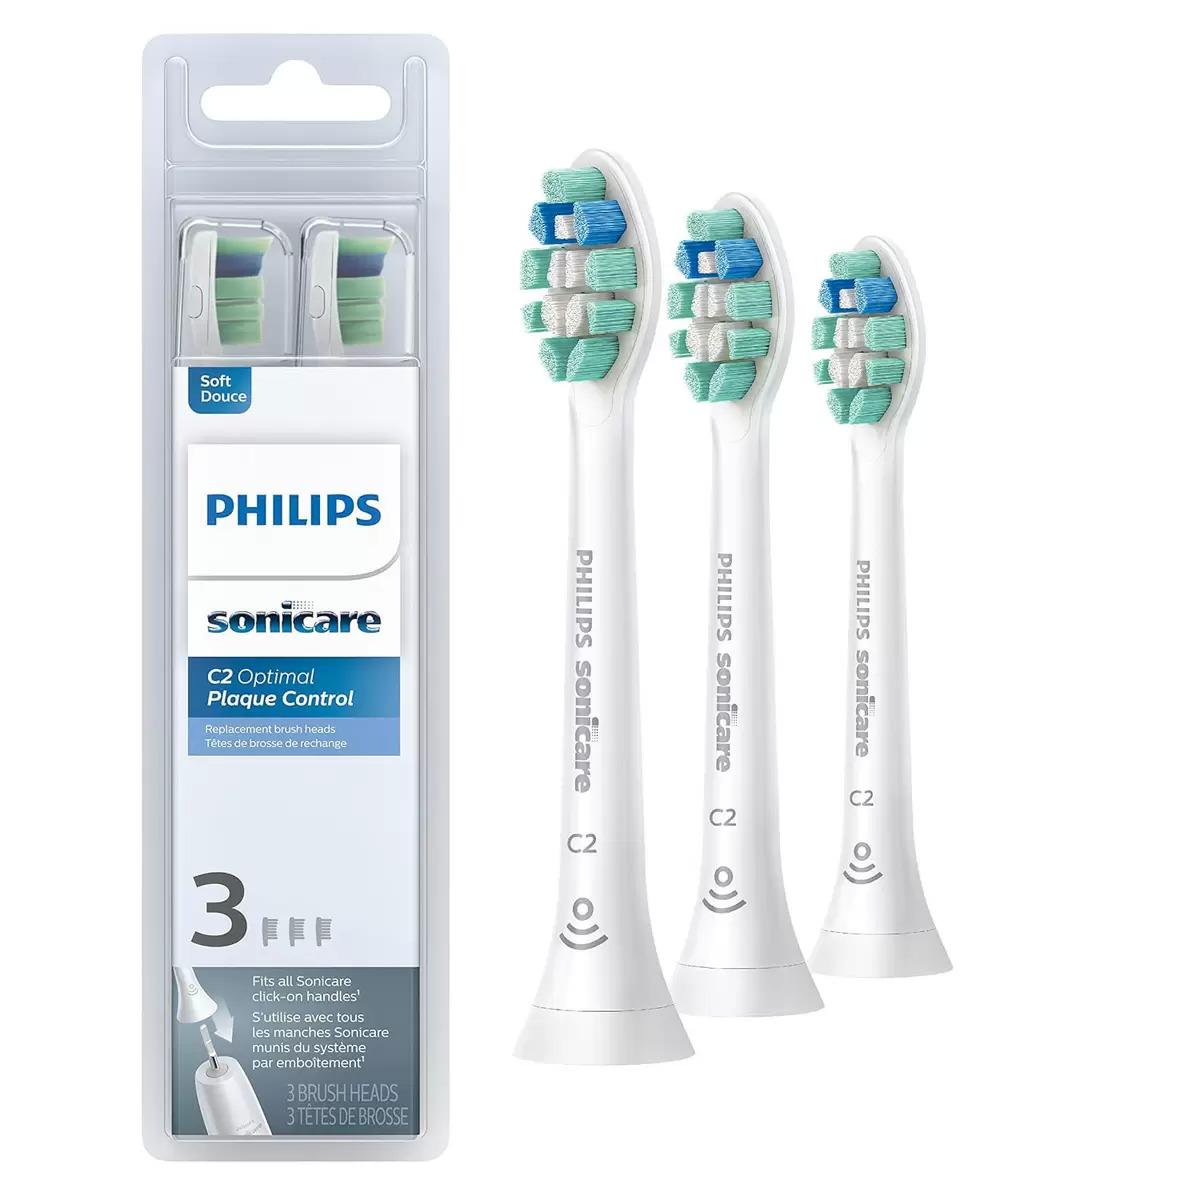 Philips Sonicare C2 Optical Plaque Control Replacement Toothbrush Head for $15.94